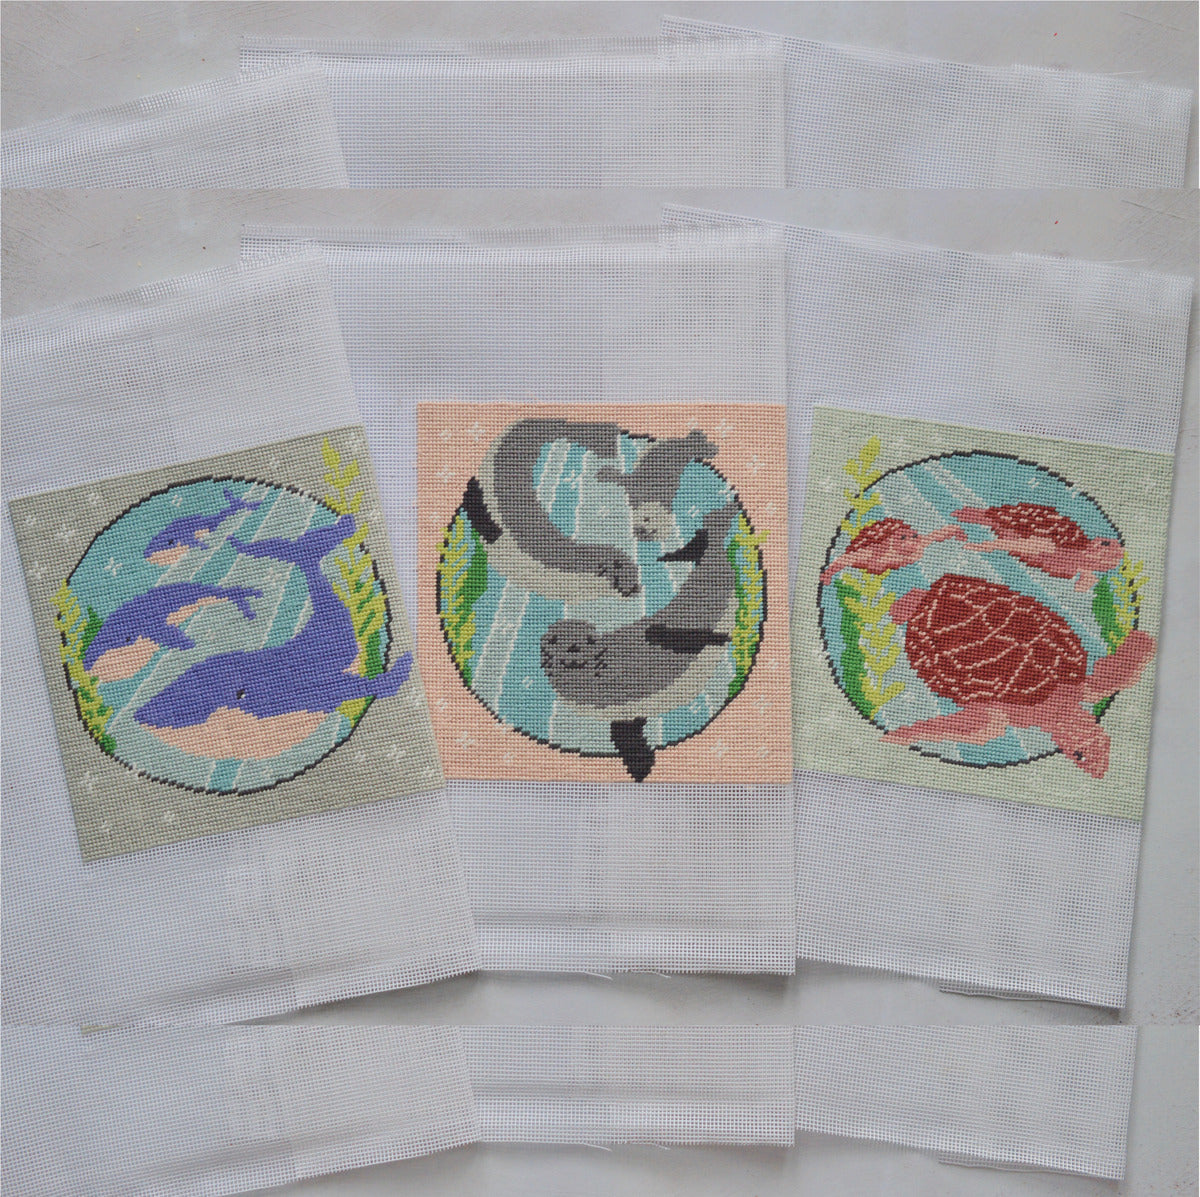 3 finished modern tapestry kits using printed canvas and anchor soft cotton threads.